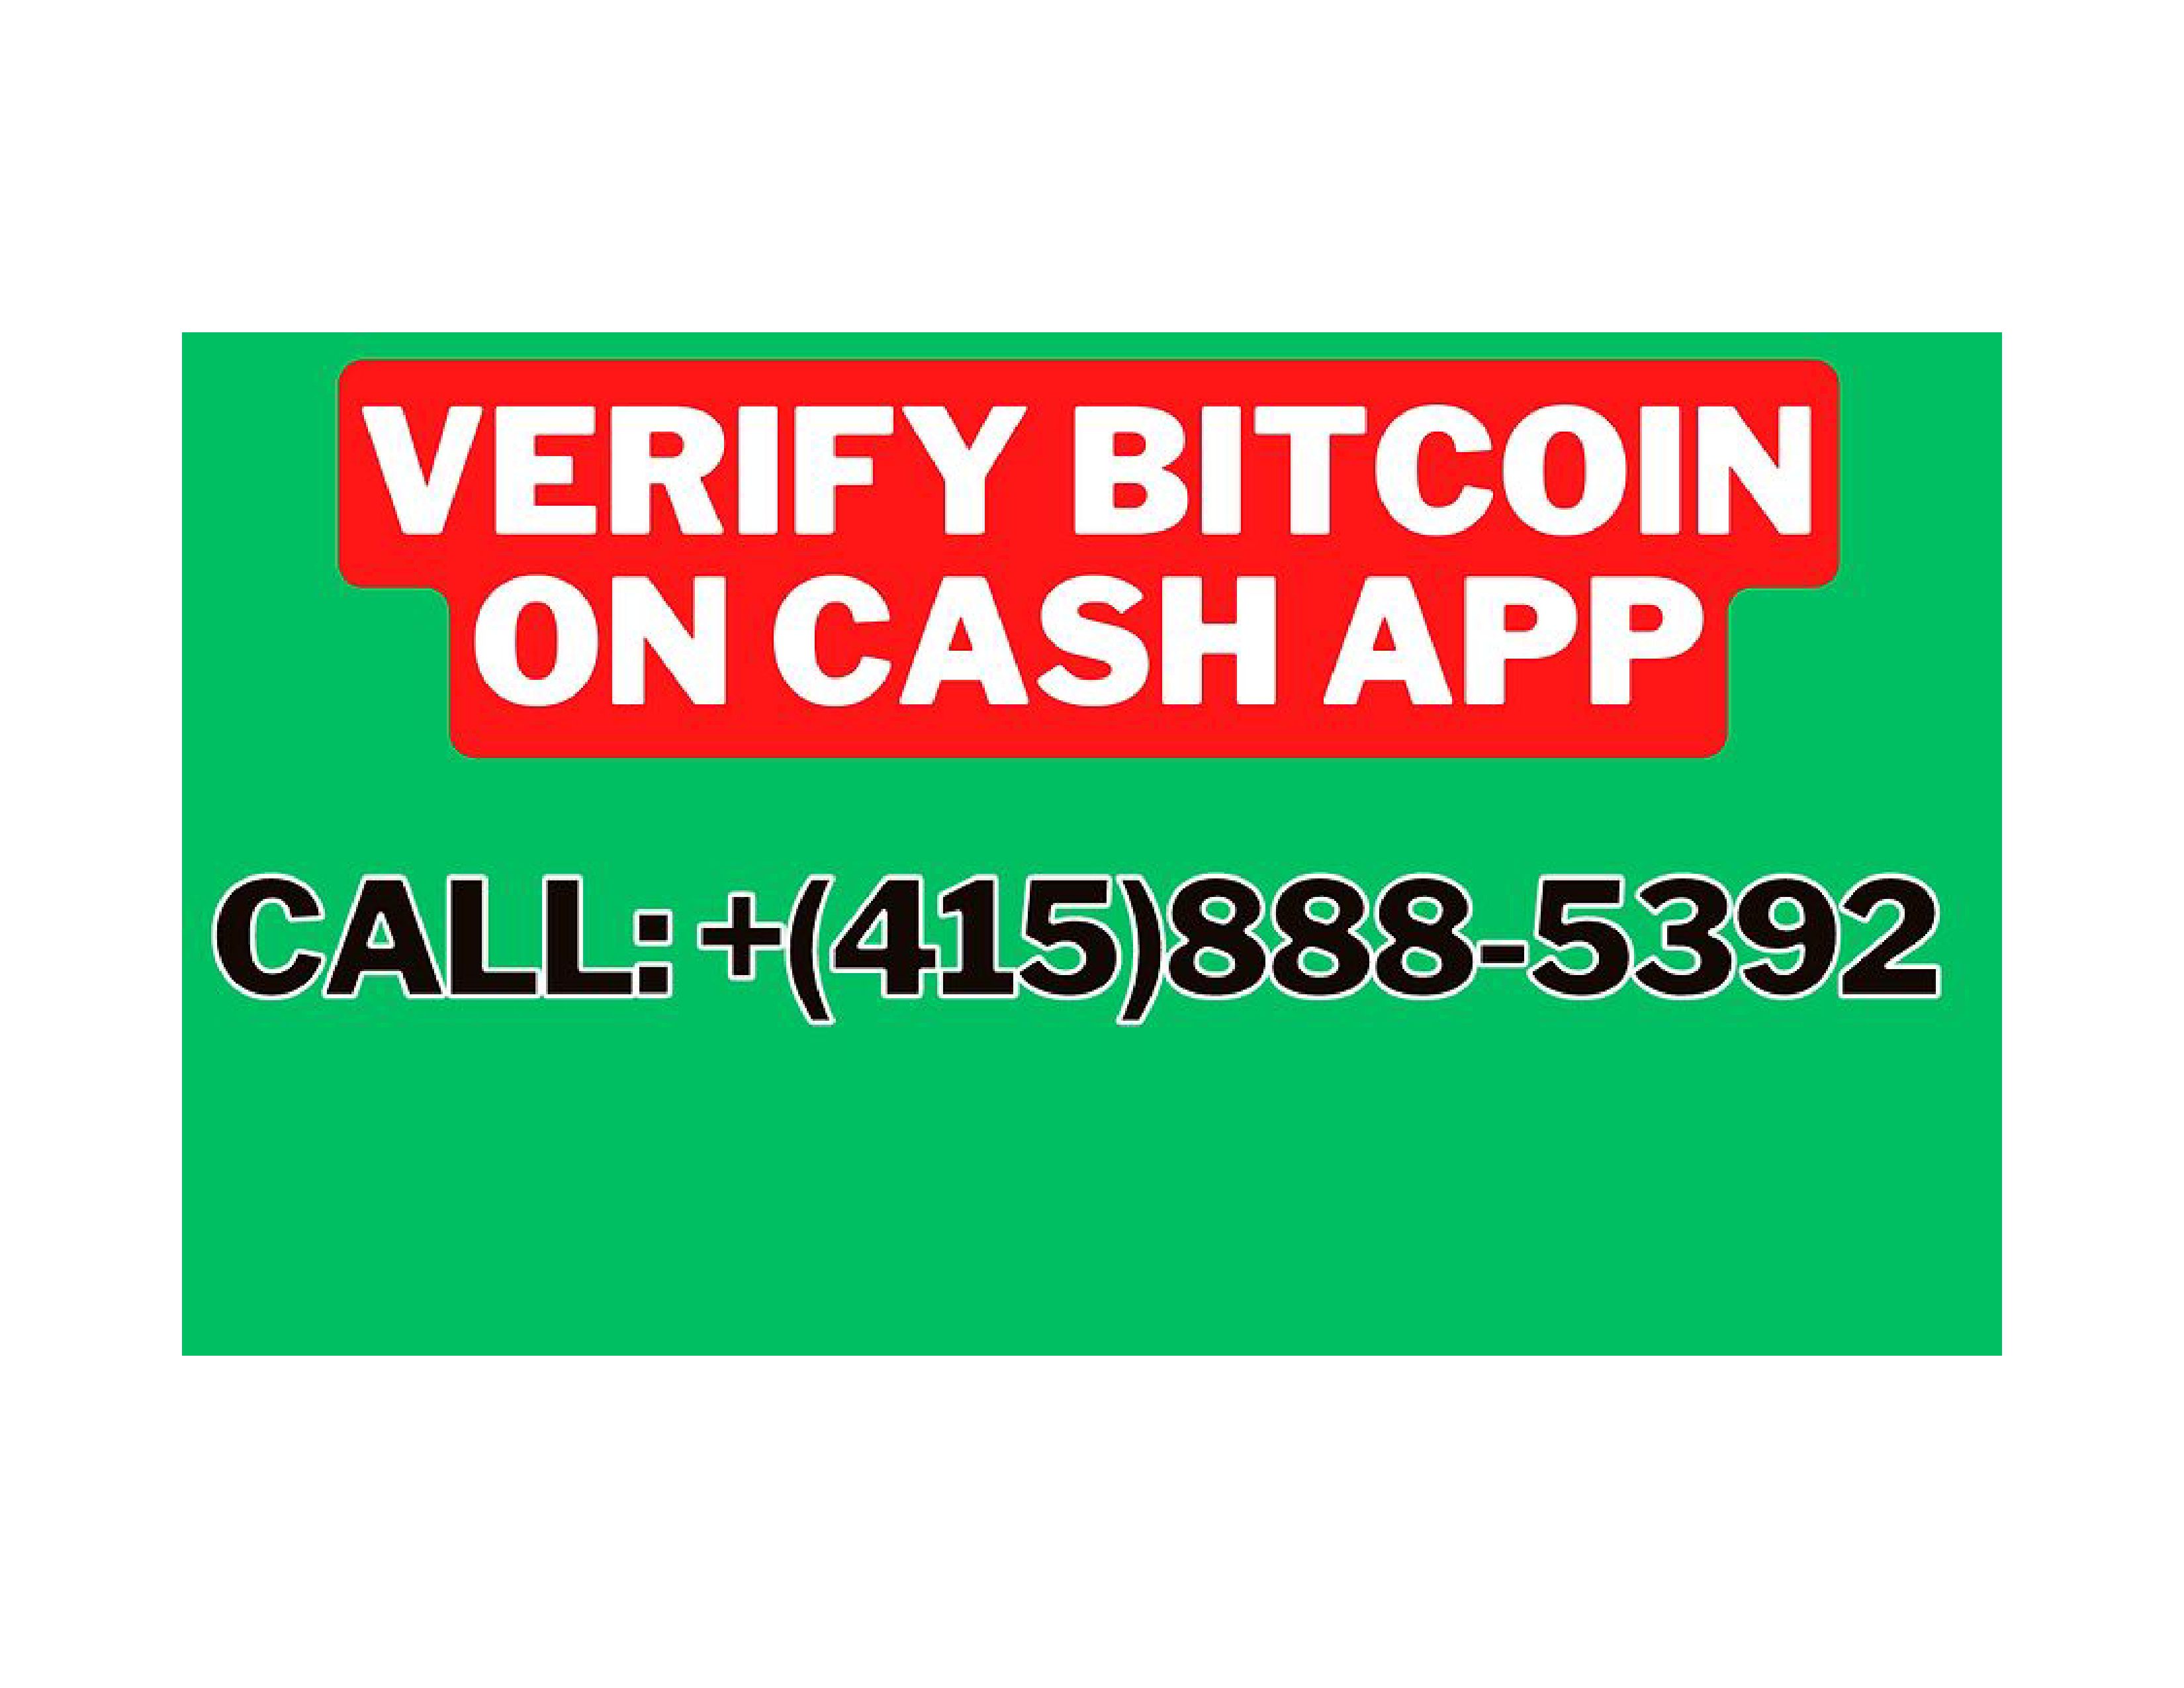 Article about Cash App Bitcoin Verification Pending: Tips and Tricks to Speed Up the Process